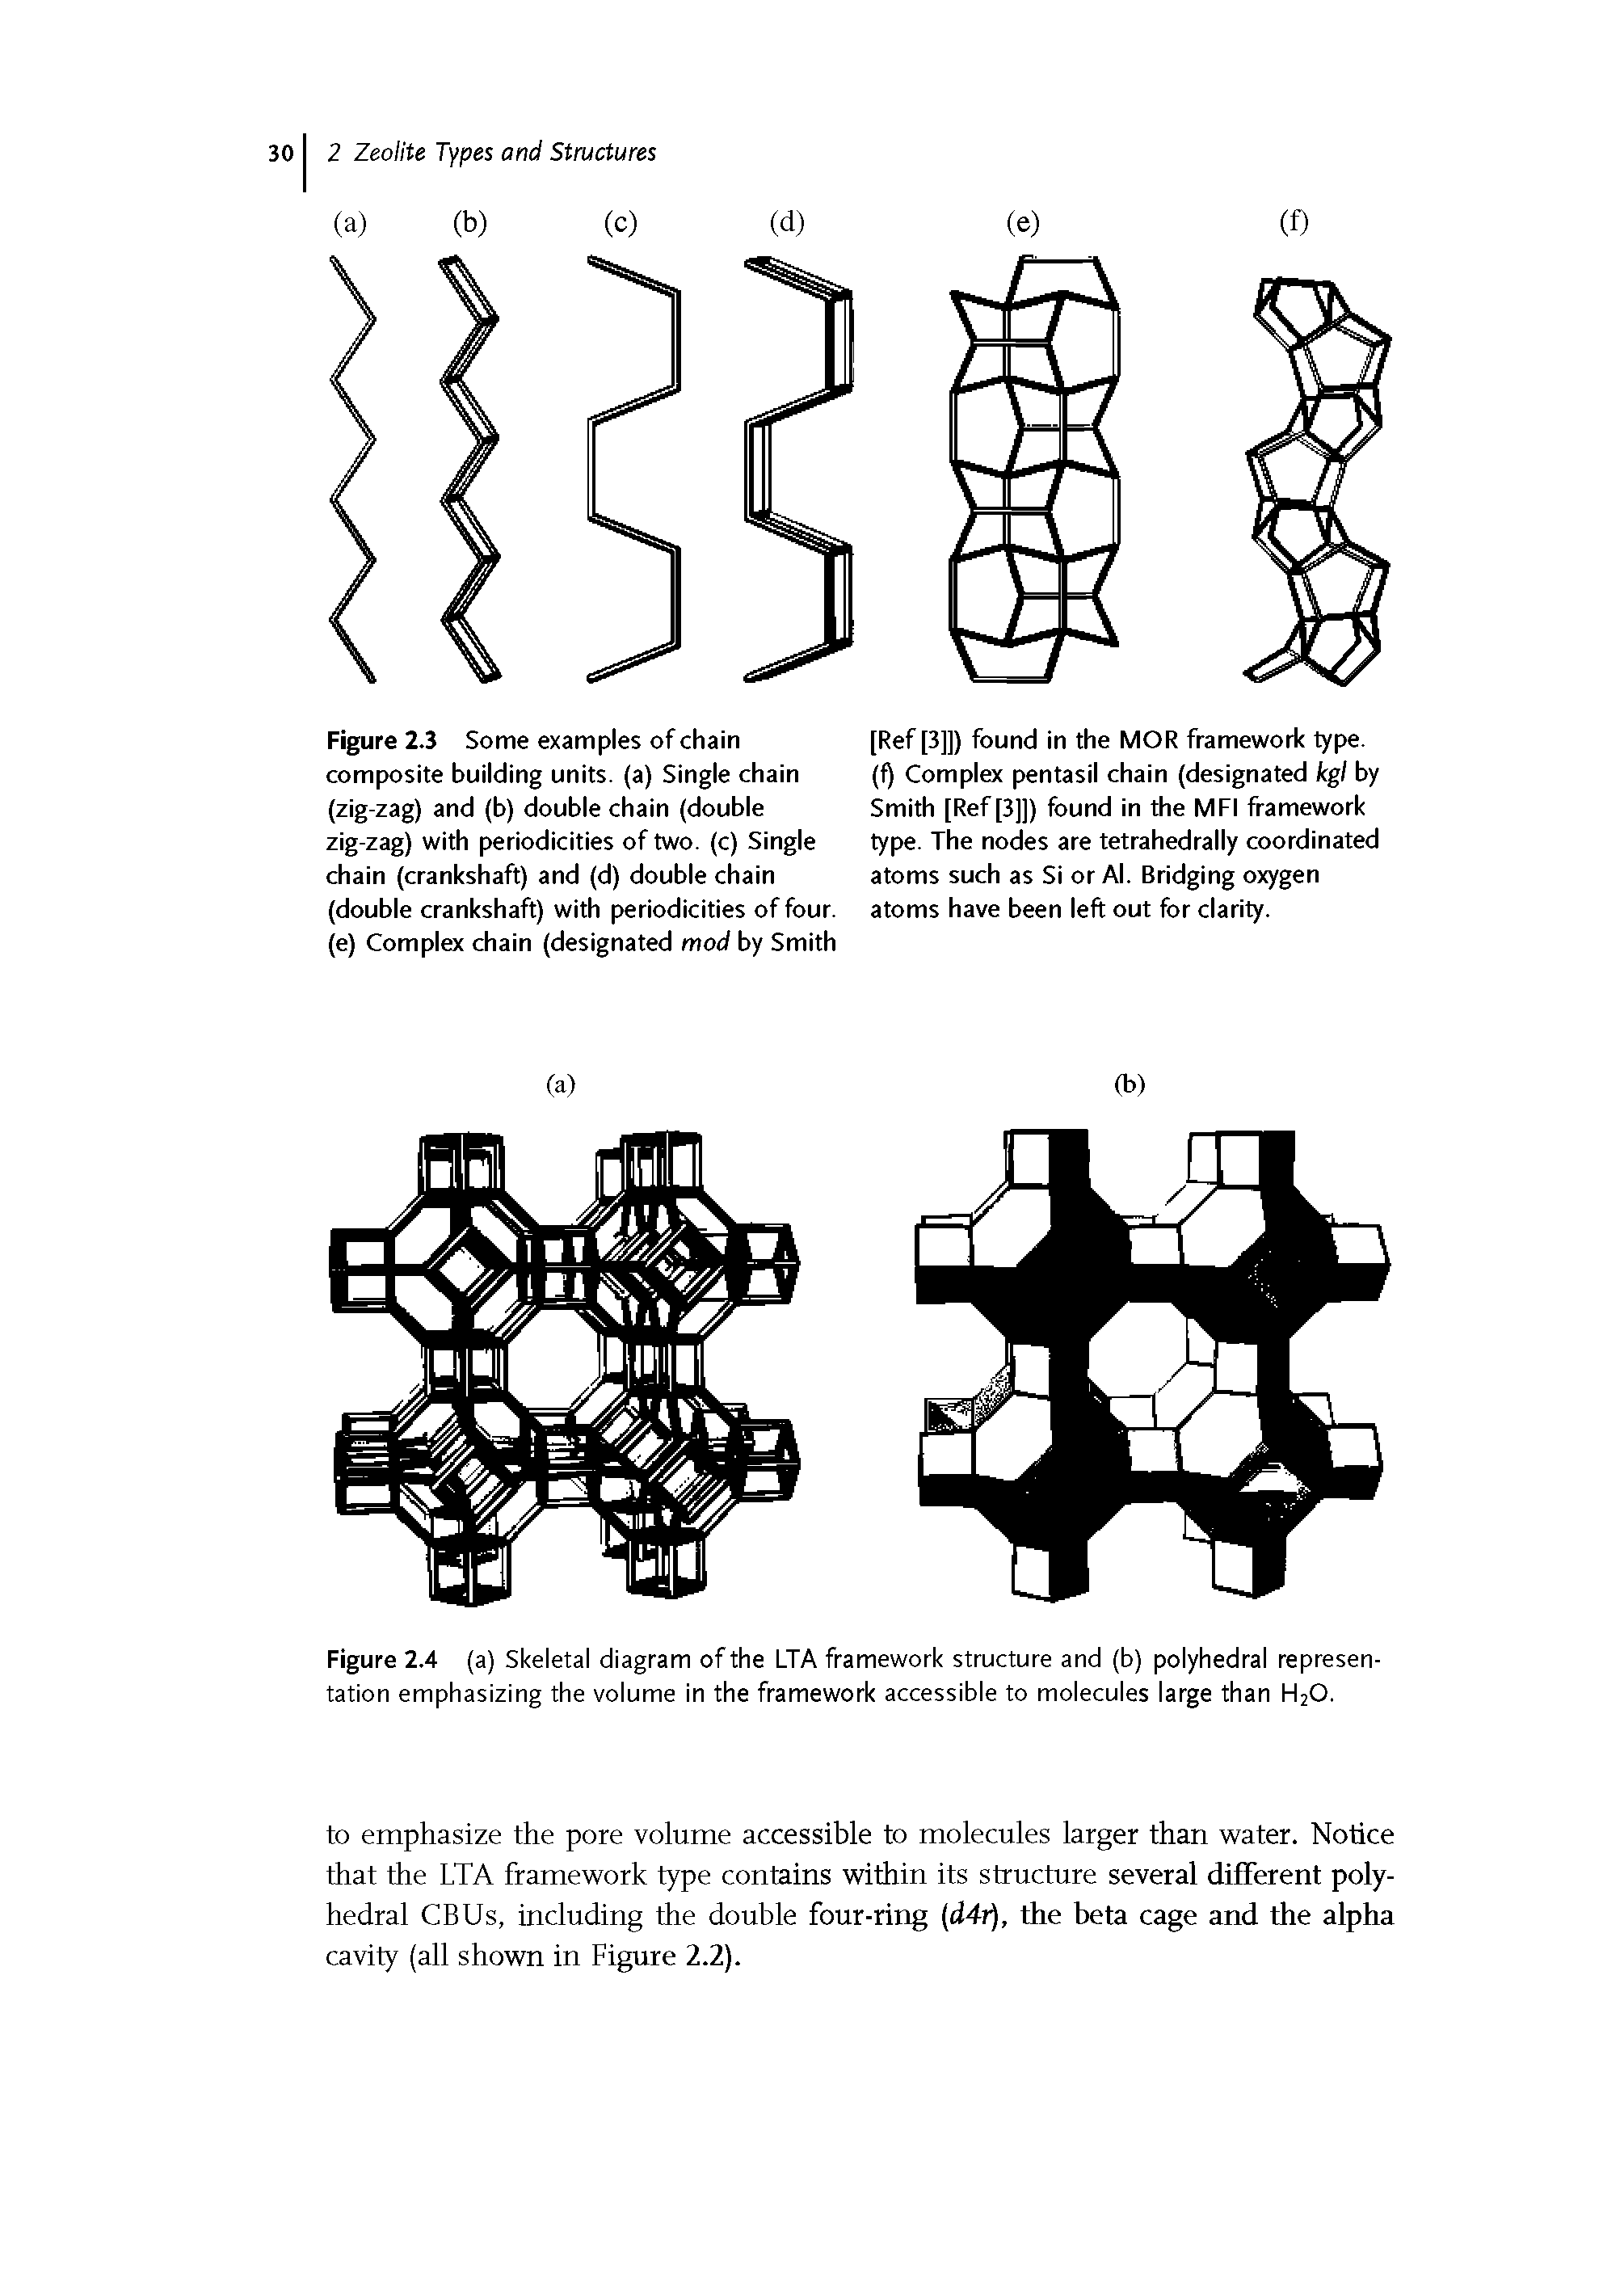 Figure 2.3 Some examples of chain composite building units, (a) Single chain (zig-zag) and (b) double chain (double zig-zag) with periodicities of two. (c) Single chain (crankshaft) and (d) double chain (double crankshaft) with periodicities of four, (e) Complex chain (designated mod by Smith...